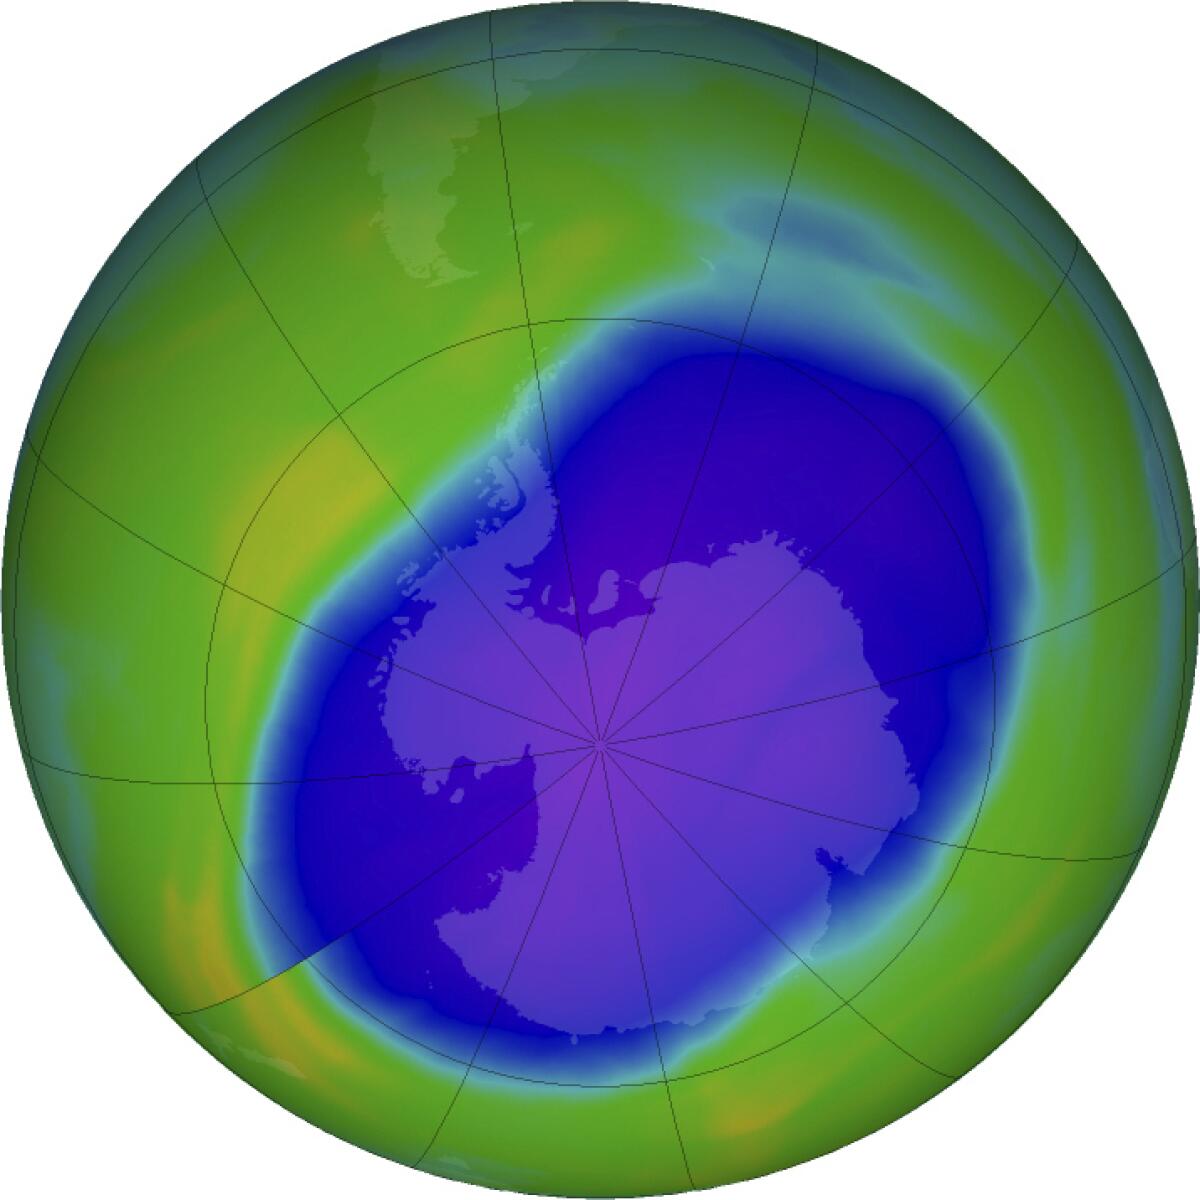 Color image showing ozone layer over the Earth